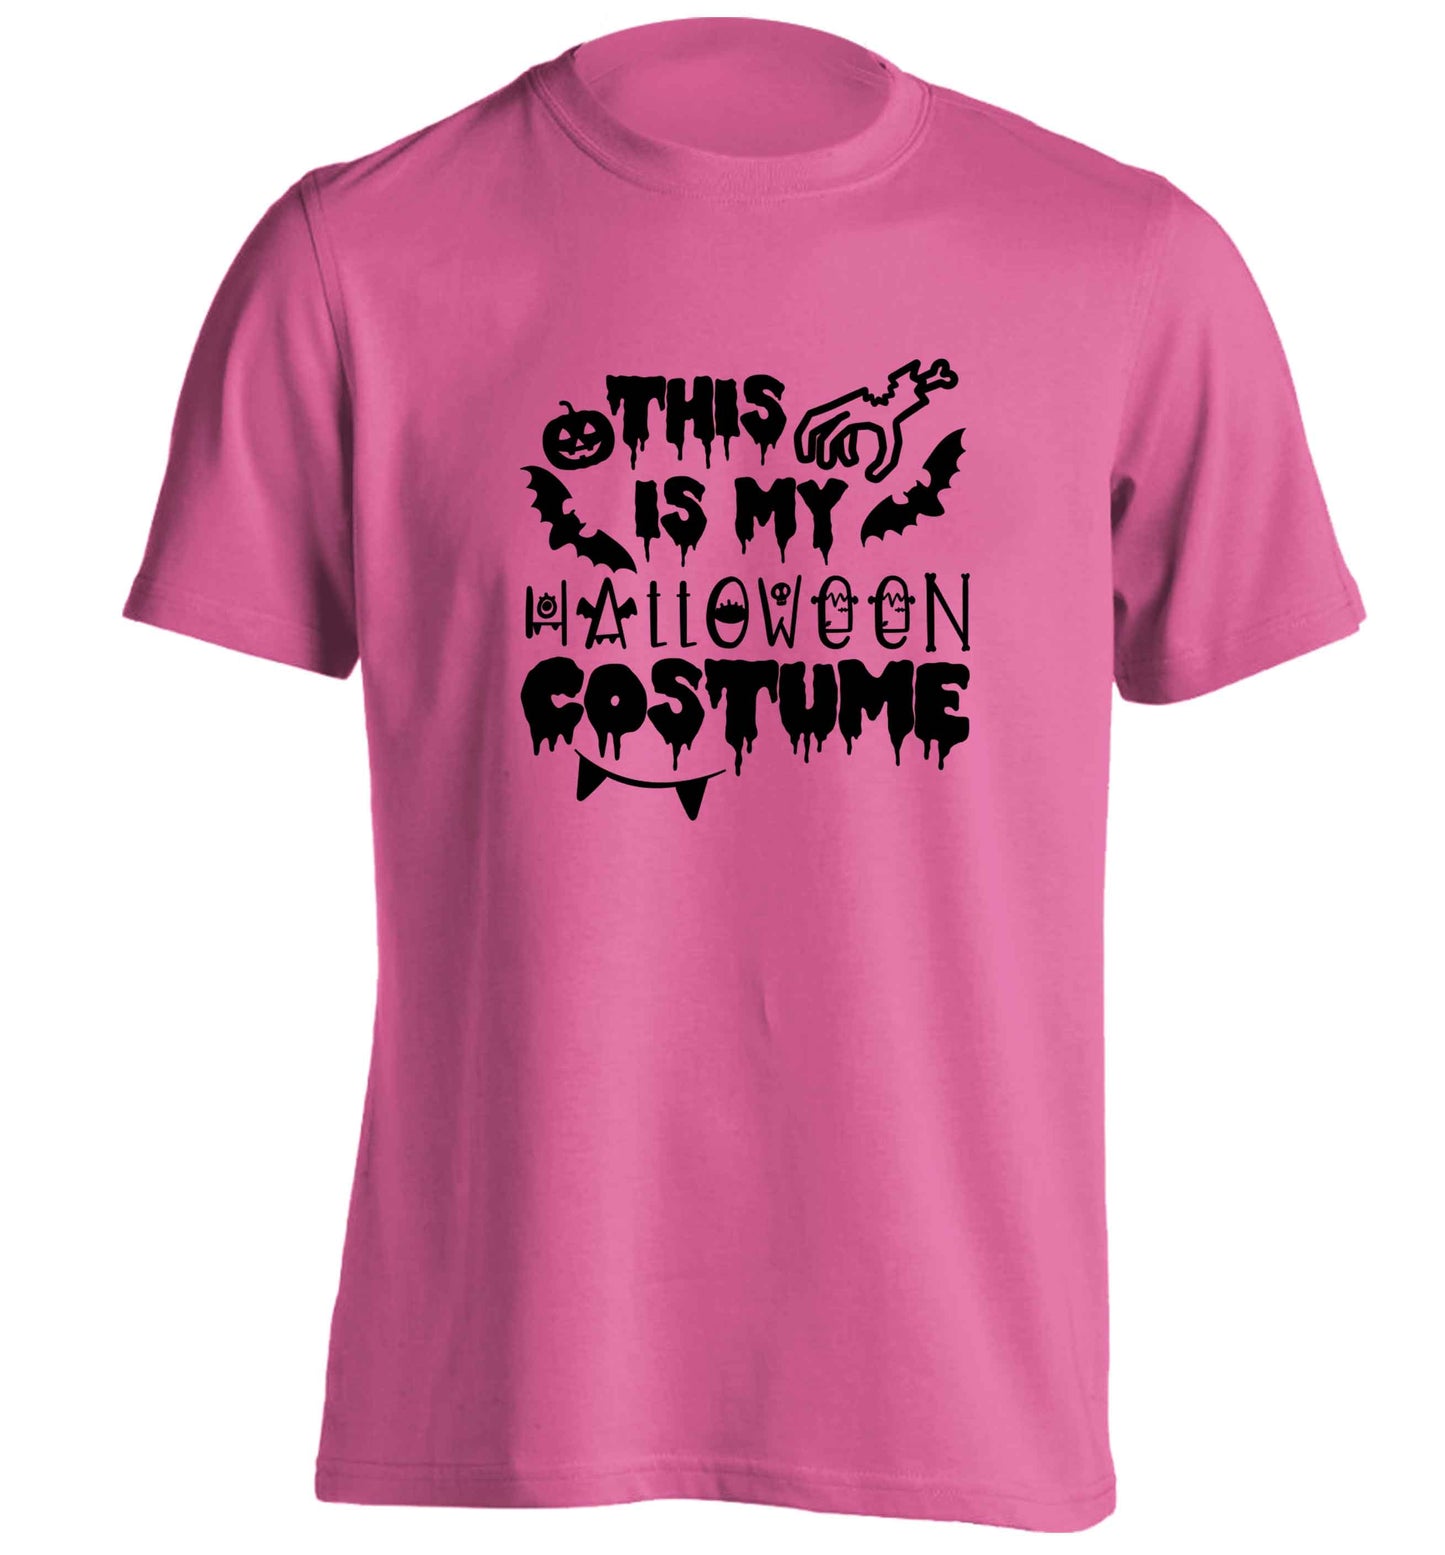 This is my halloween costume adults unisex pink Tshirt 2XL